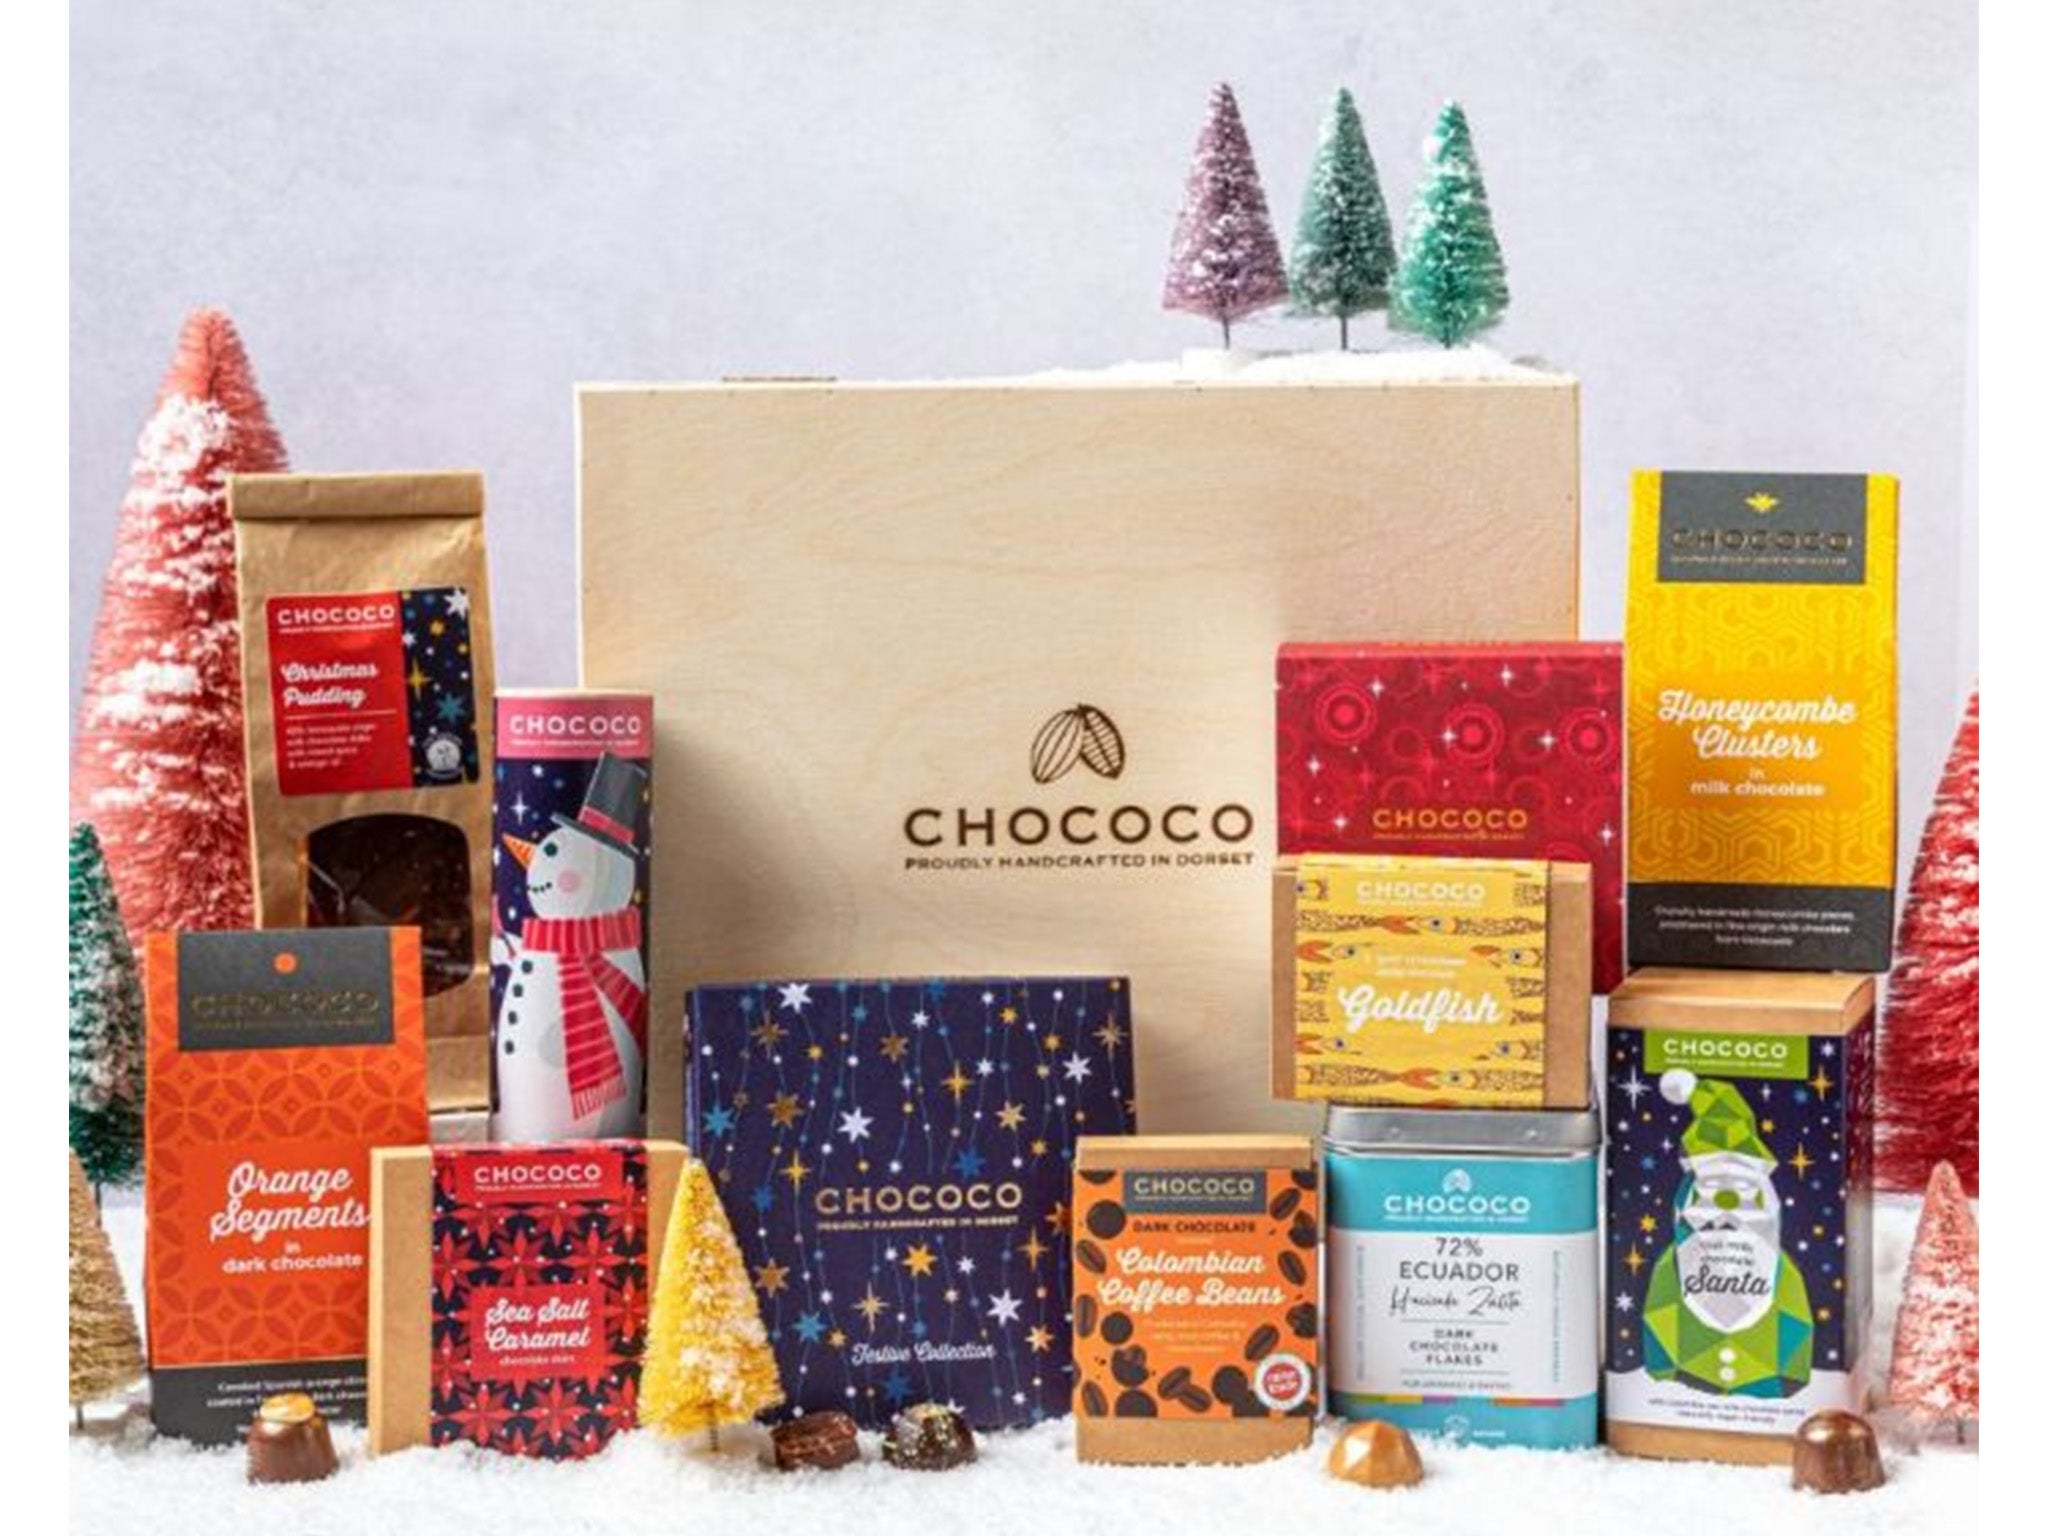 Chococo giant assorted festive chocolate hamper – in wooden box